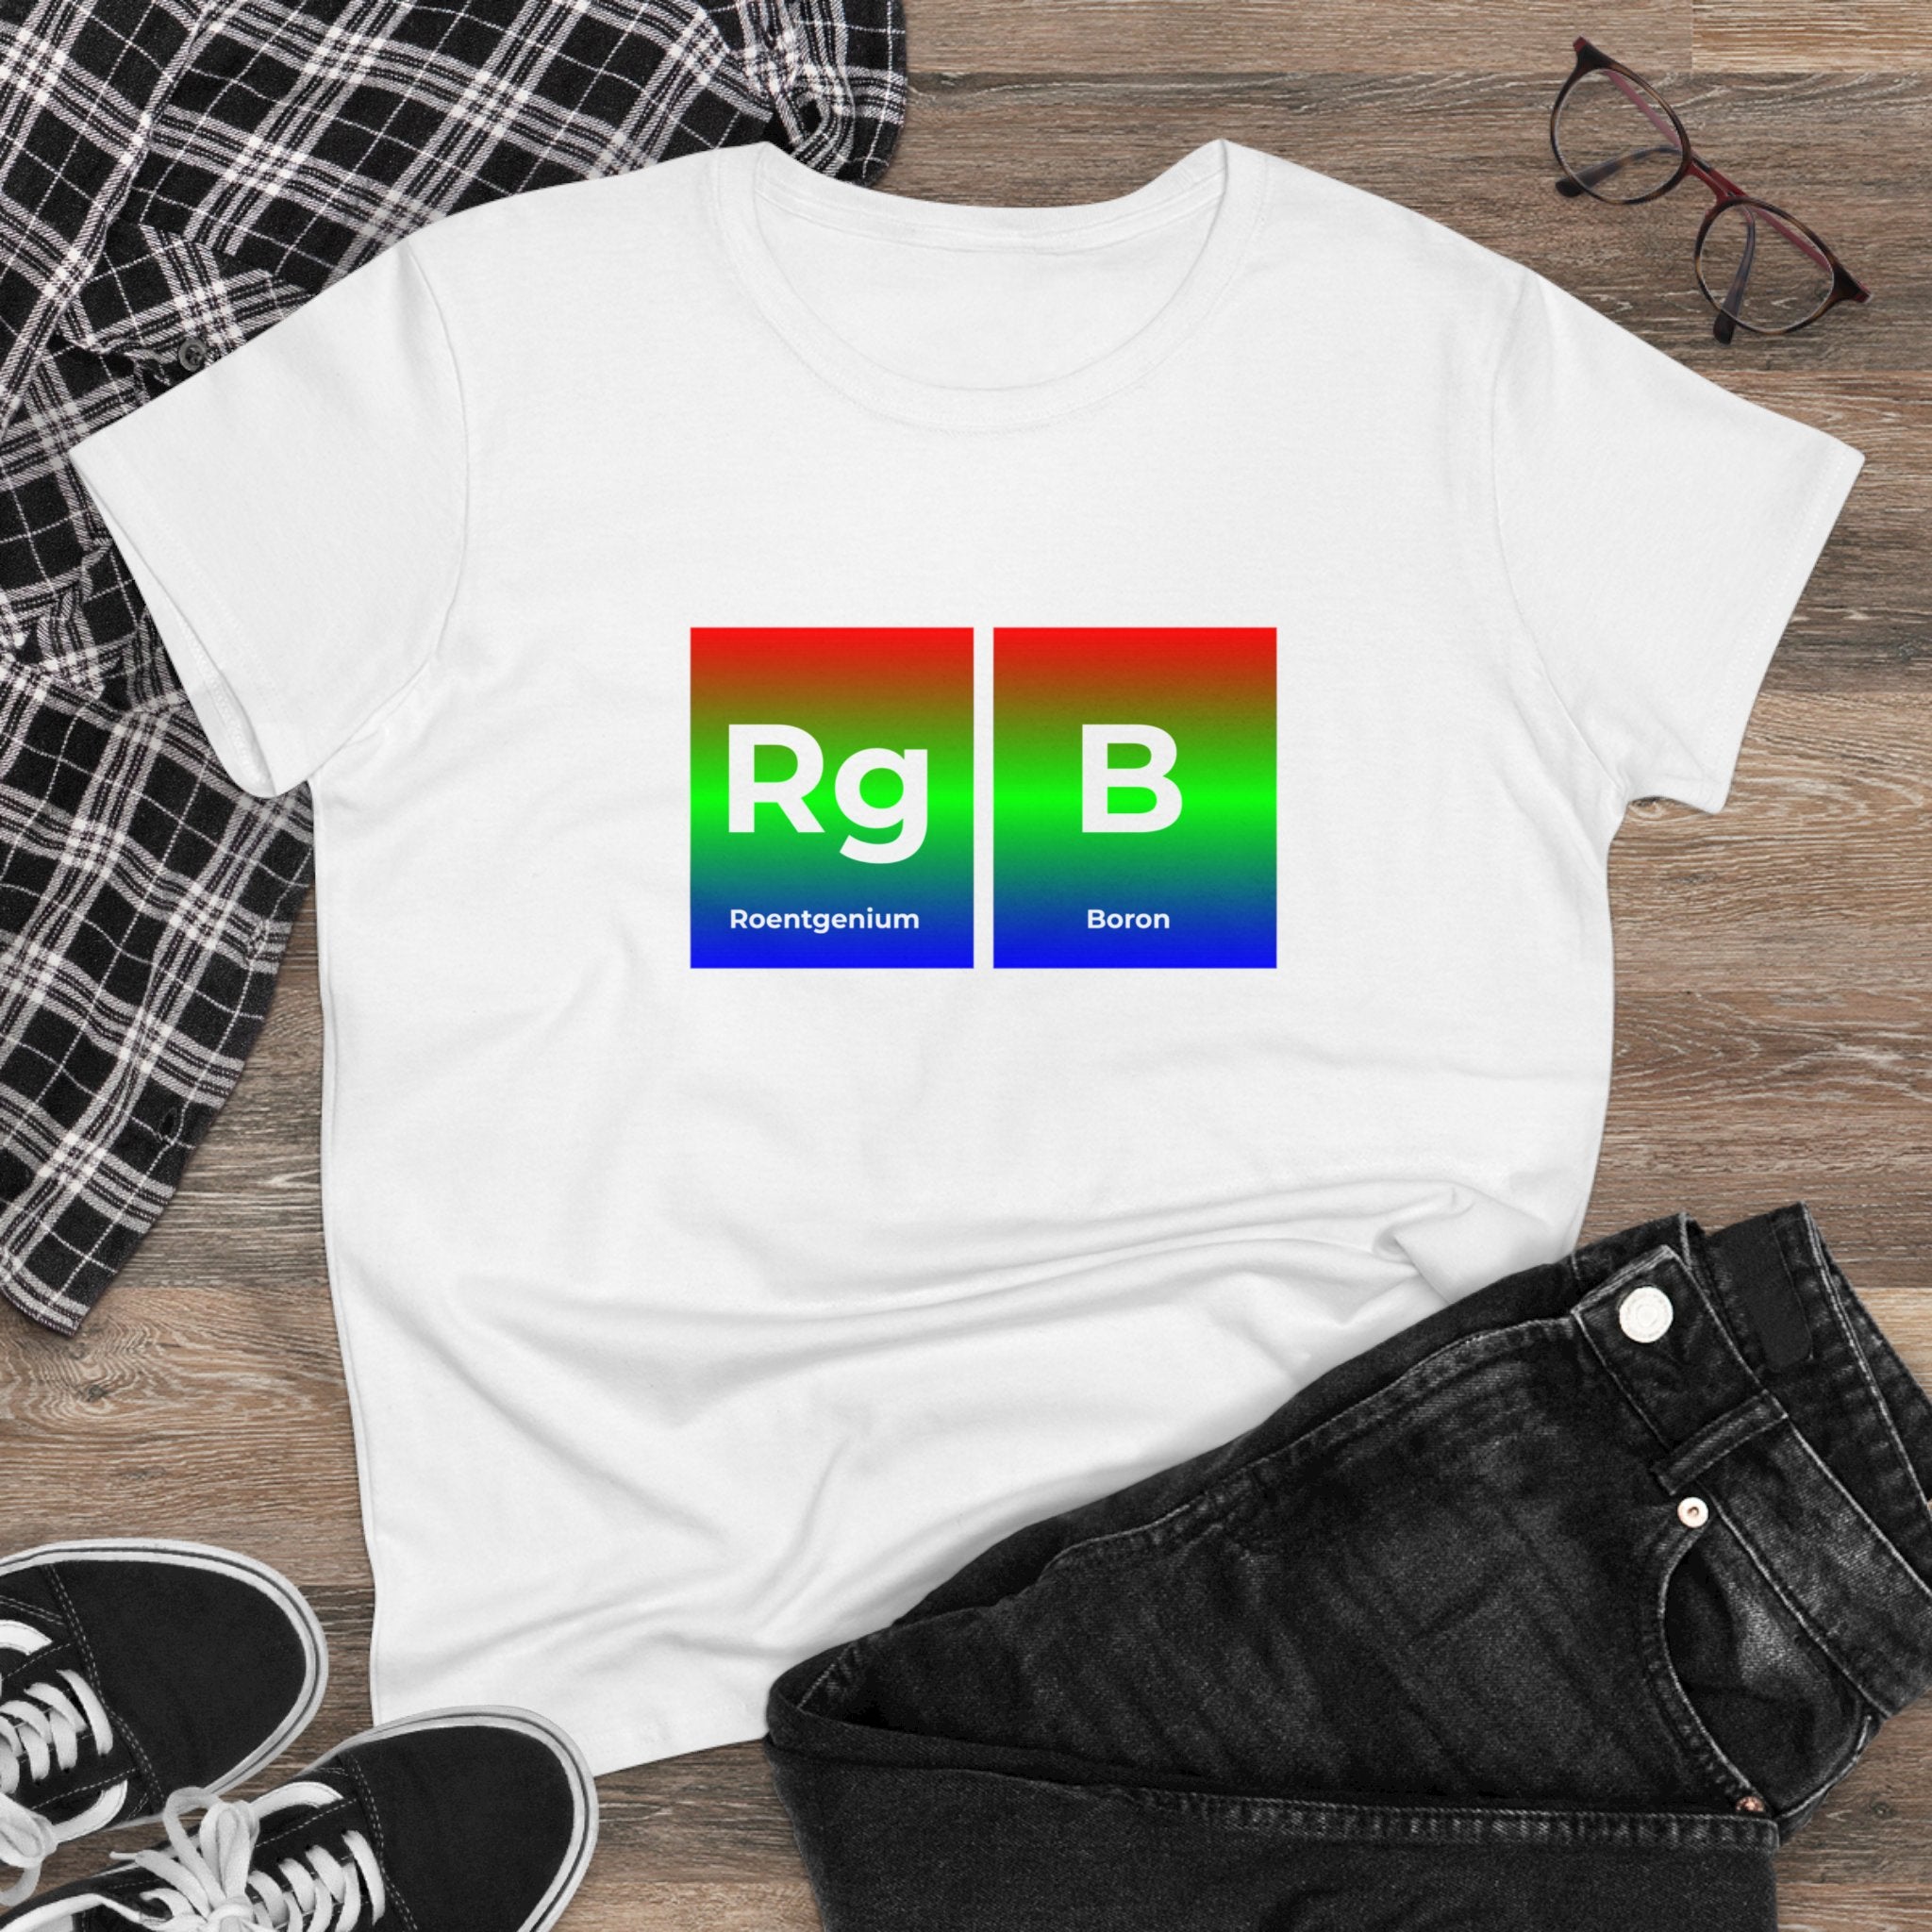 A white cotton RG-B - Women's Tee with a design featuring the elements Roentgenium (Rg) and Boron (B) on a wooden surface, paired with a black plaid shirt, black jeans, glasses, and black sneakers. Ethically fashioned for style and comfort.